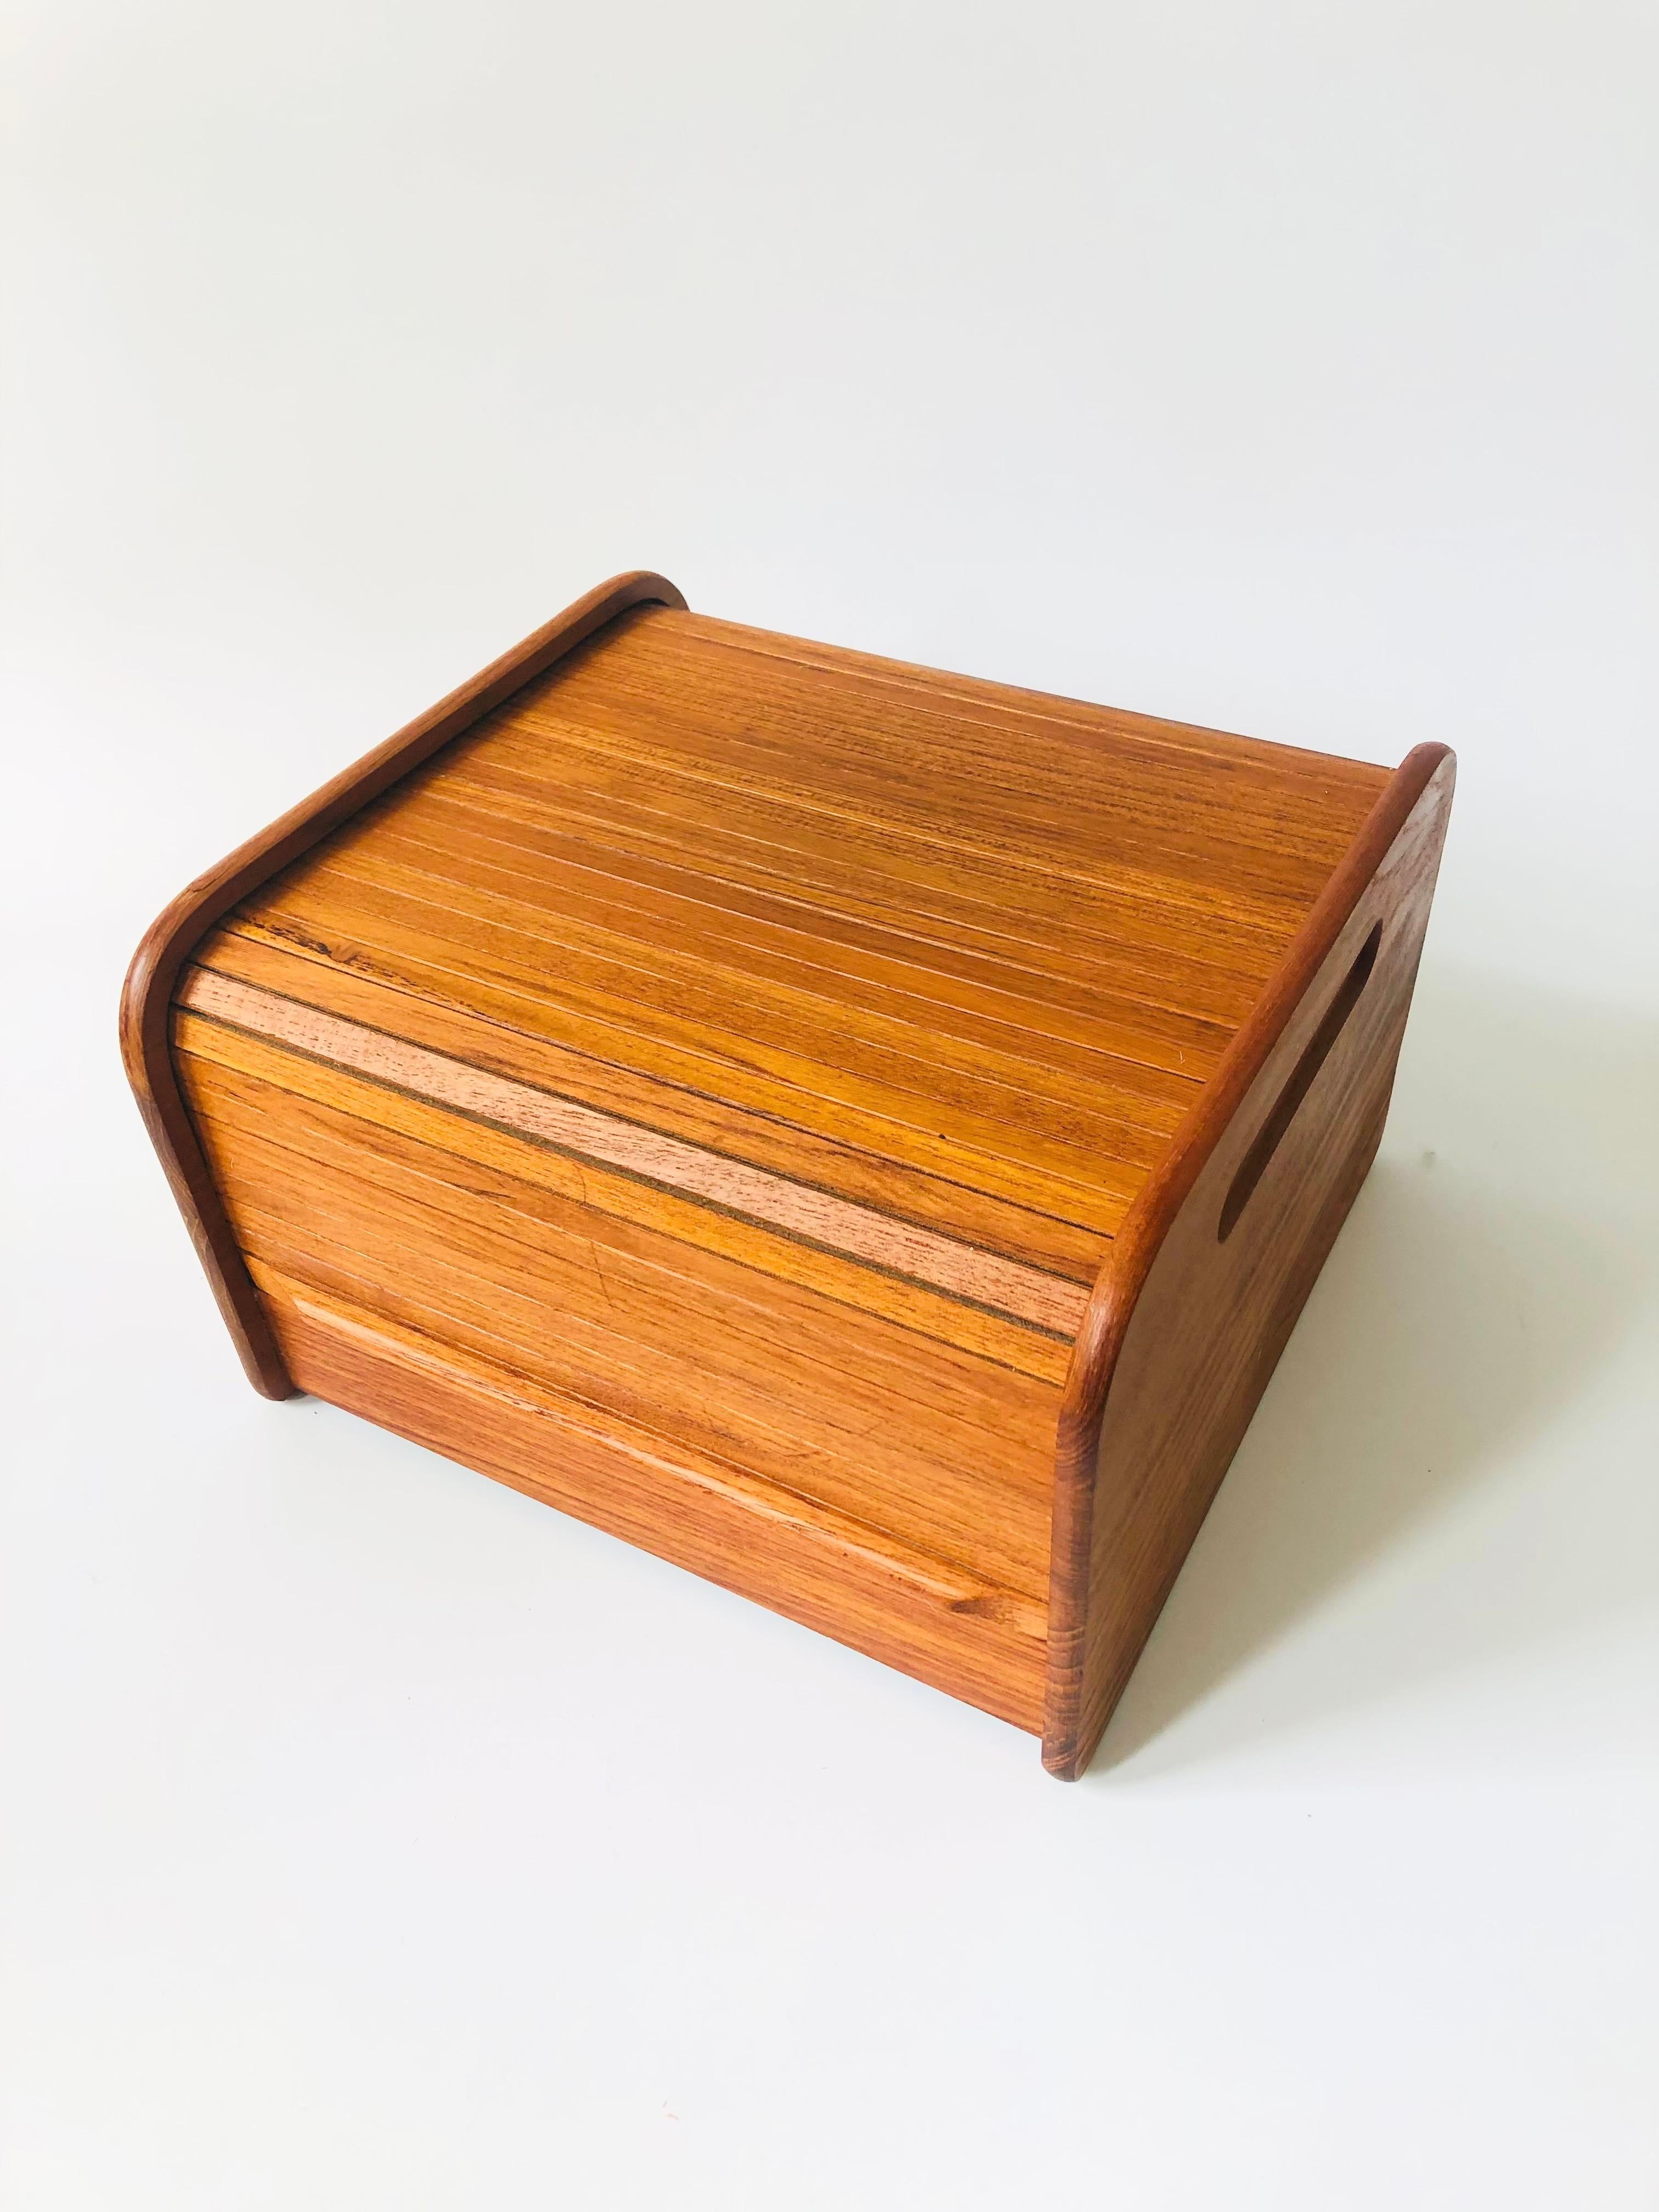 A mid century teak tambour door storage box. Features a pocketing lid that rolls back to reveal a roomy storage compartment. A single wood divider runs through the center. A stylish box for keeping odd and ends out of sight.